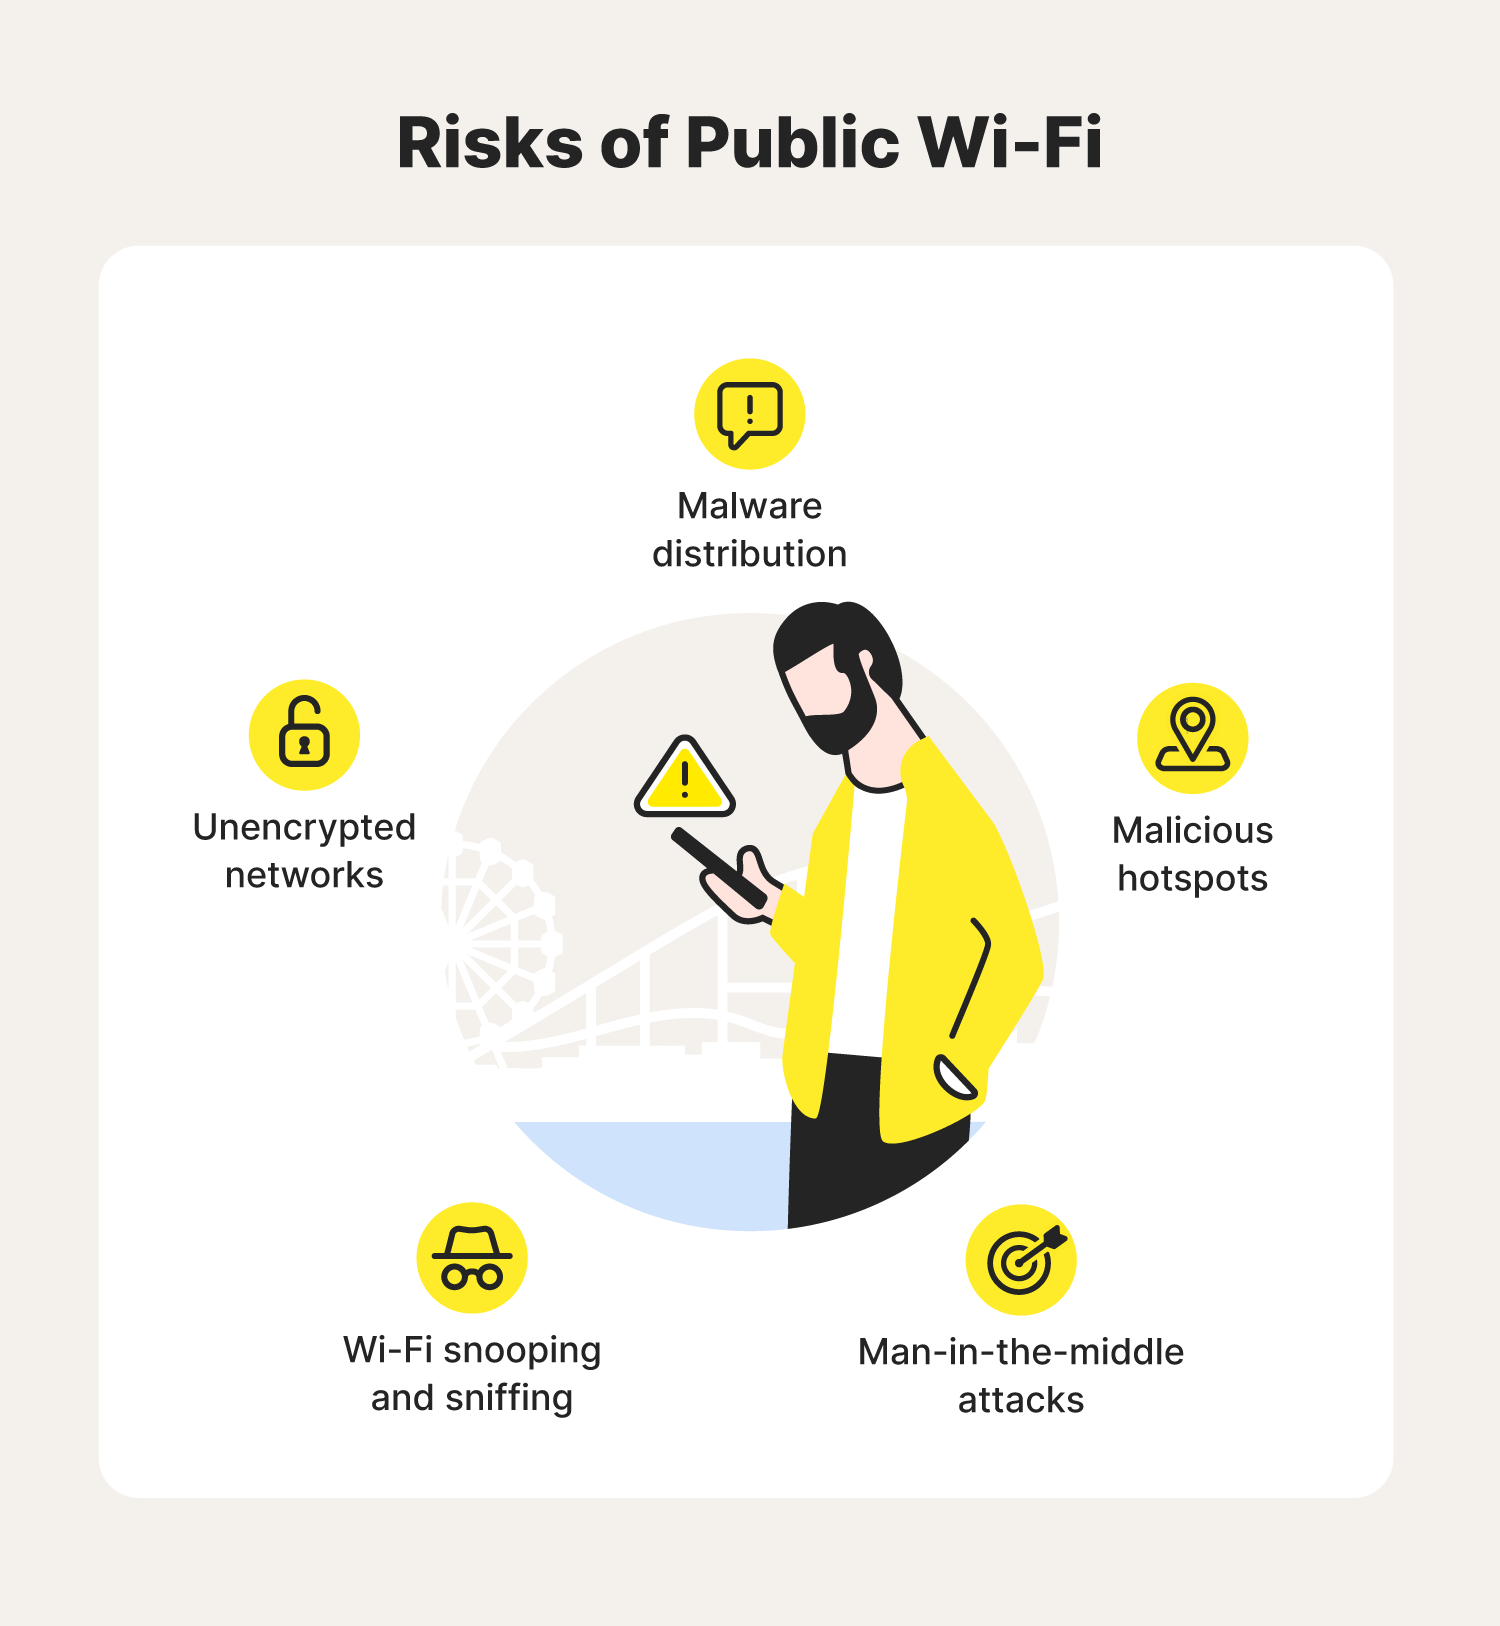 A graphic highlights the risks of public Wi-Fi.